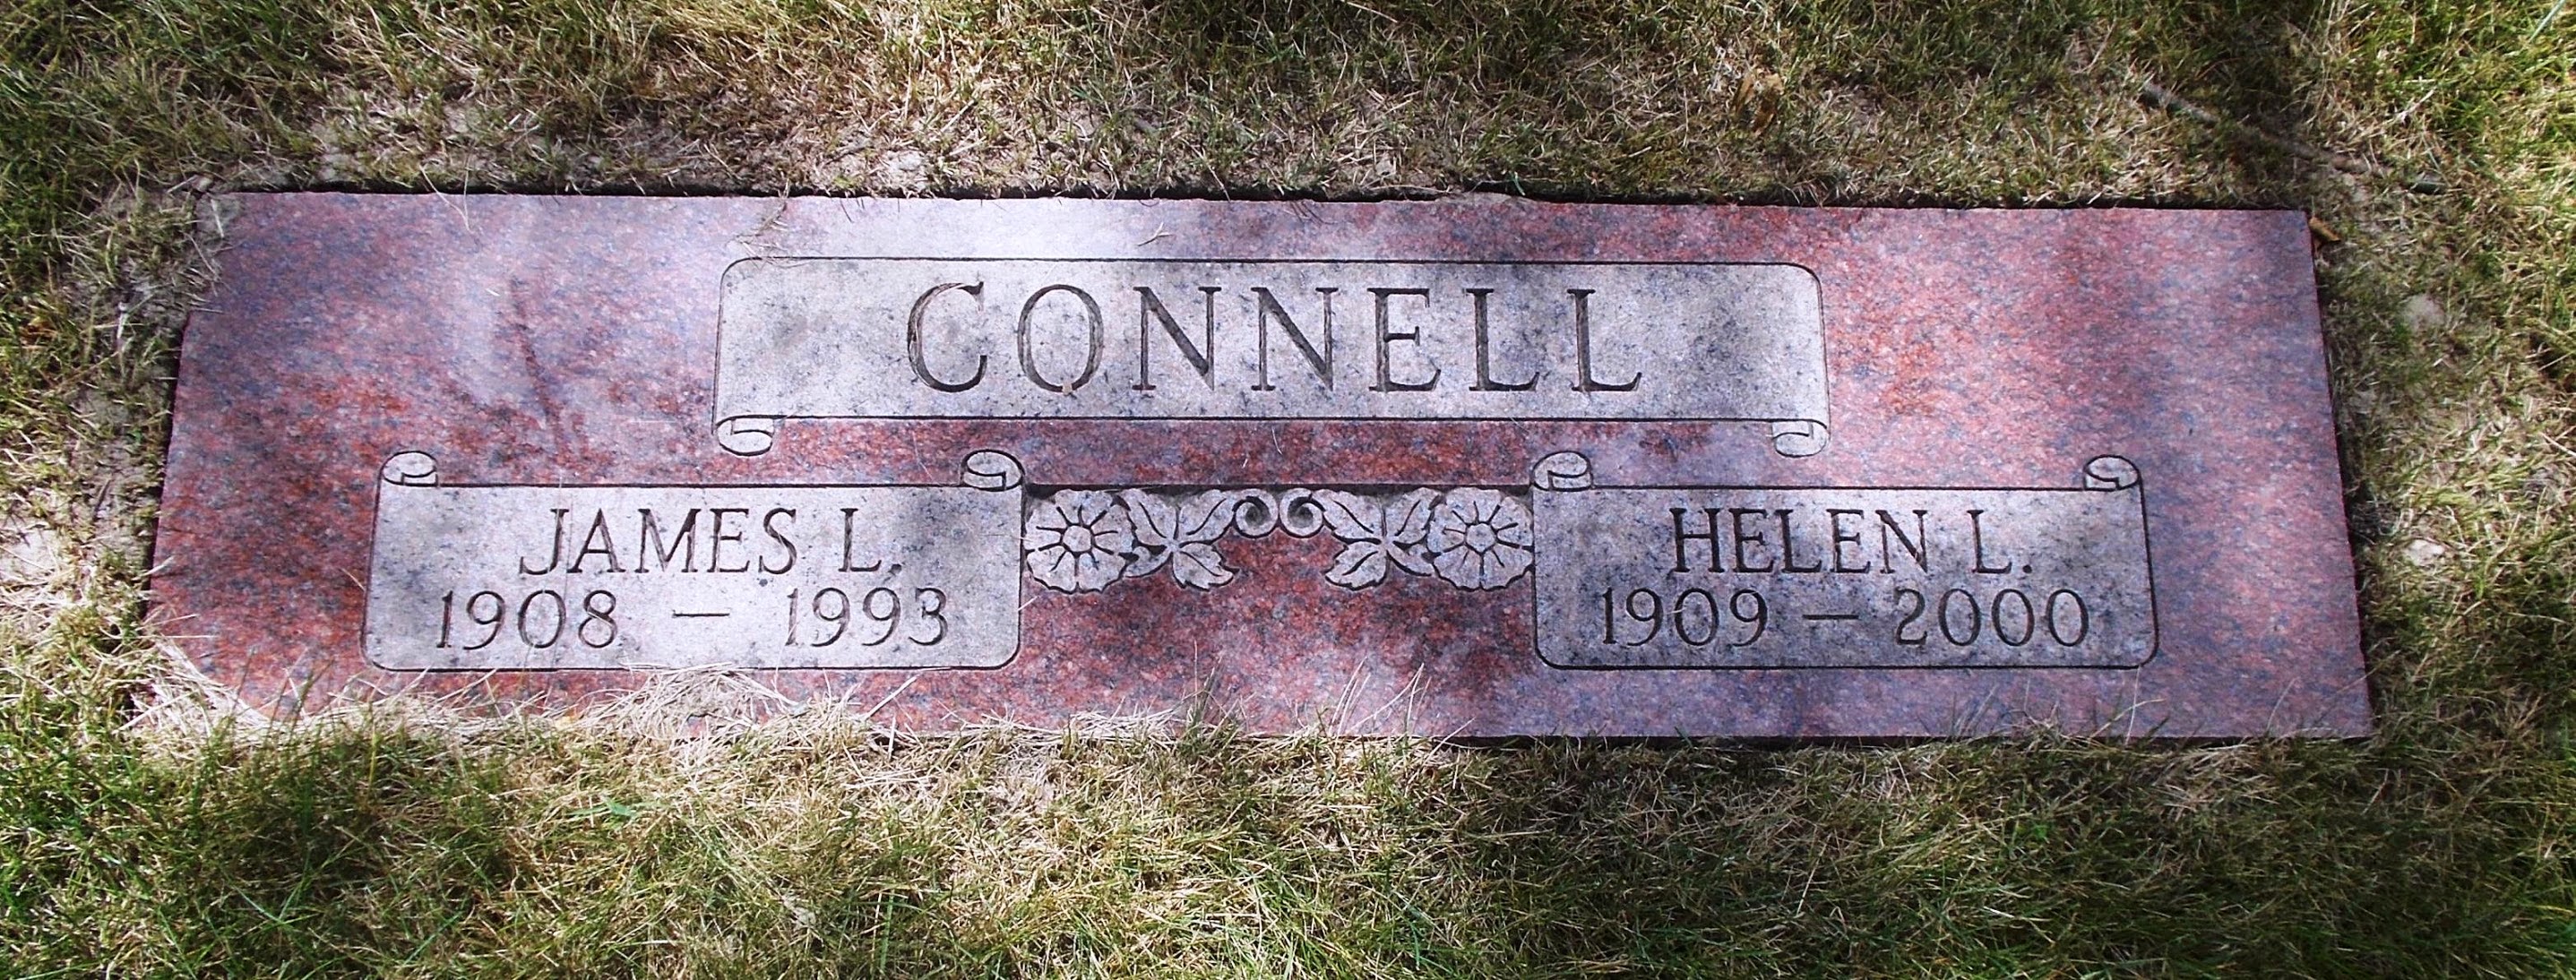 Helen L Connell